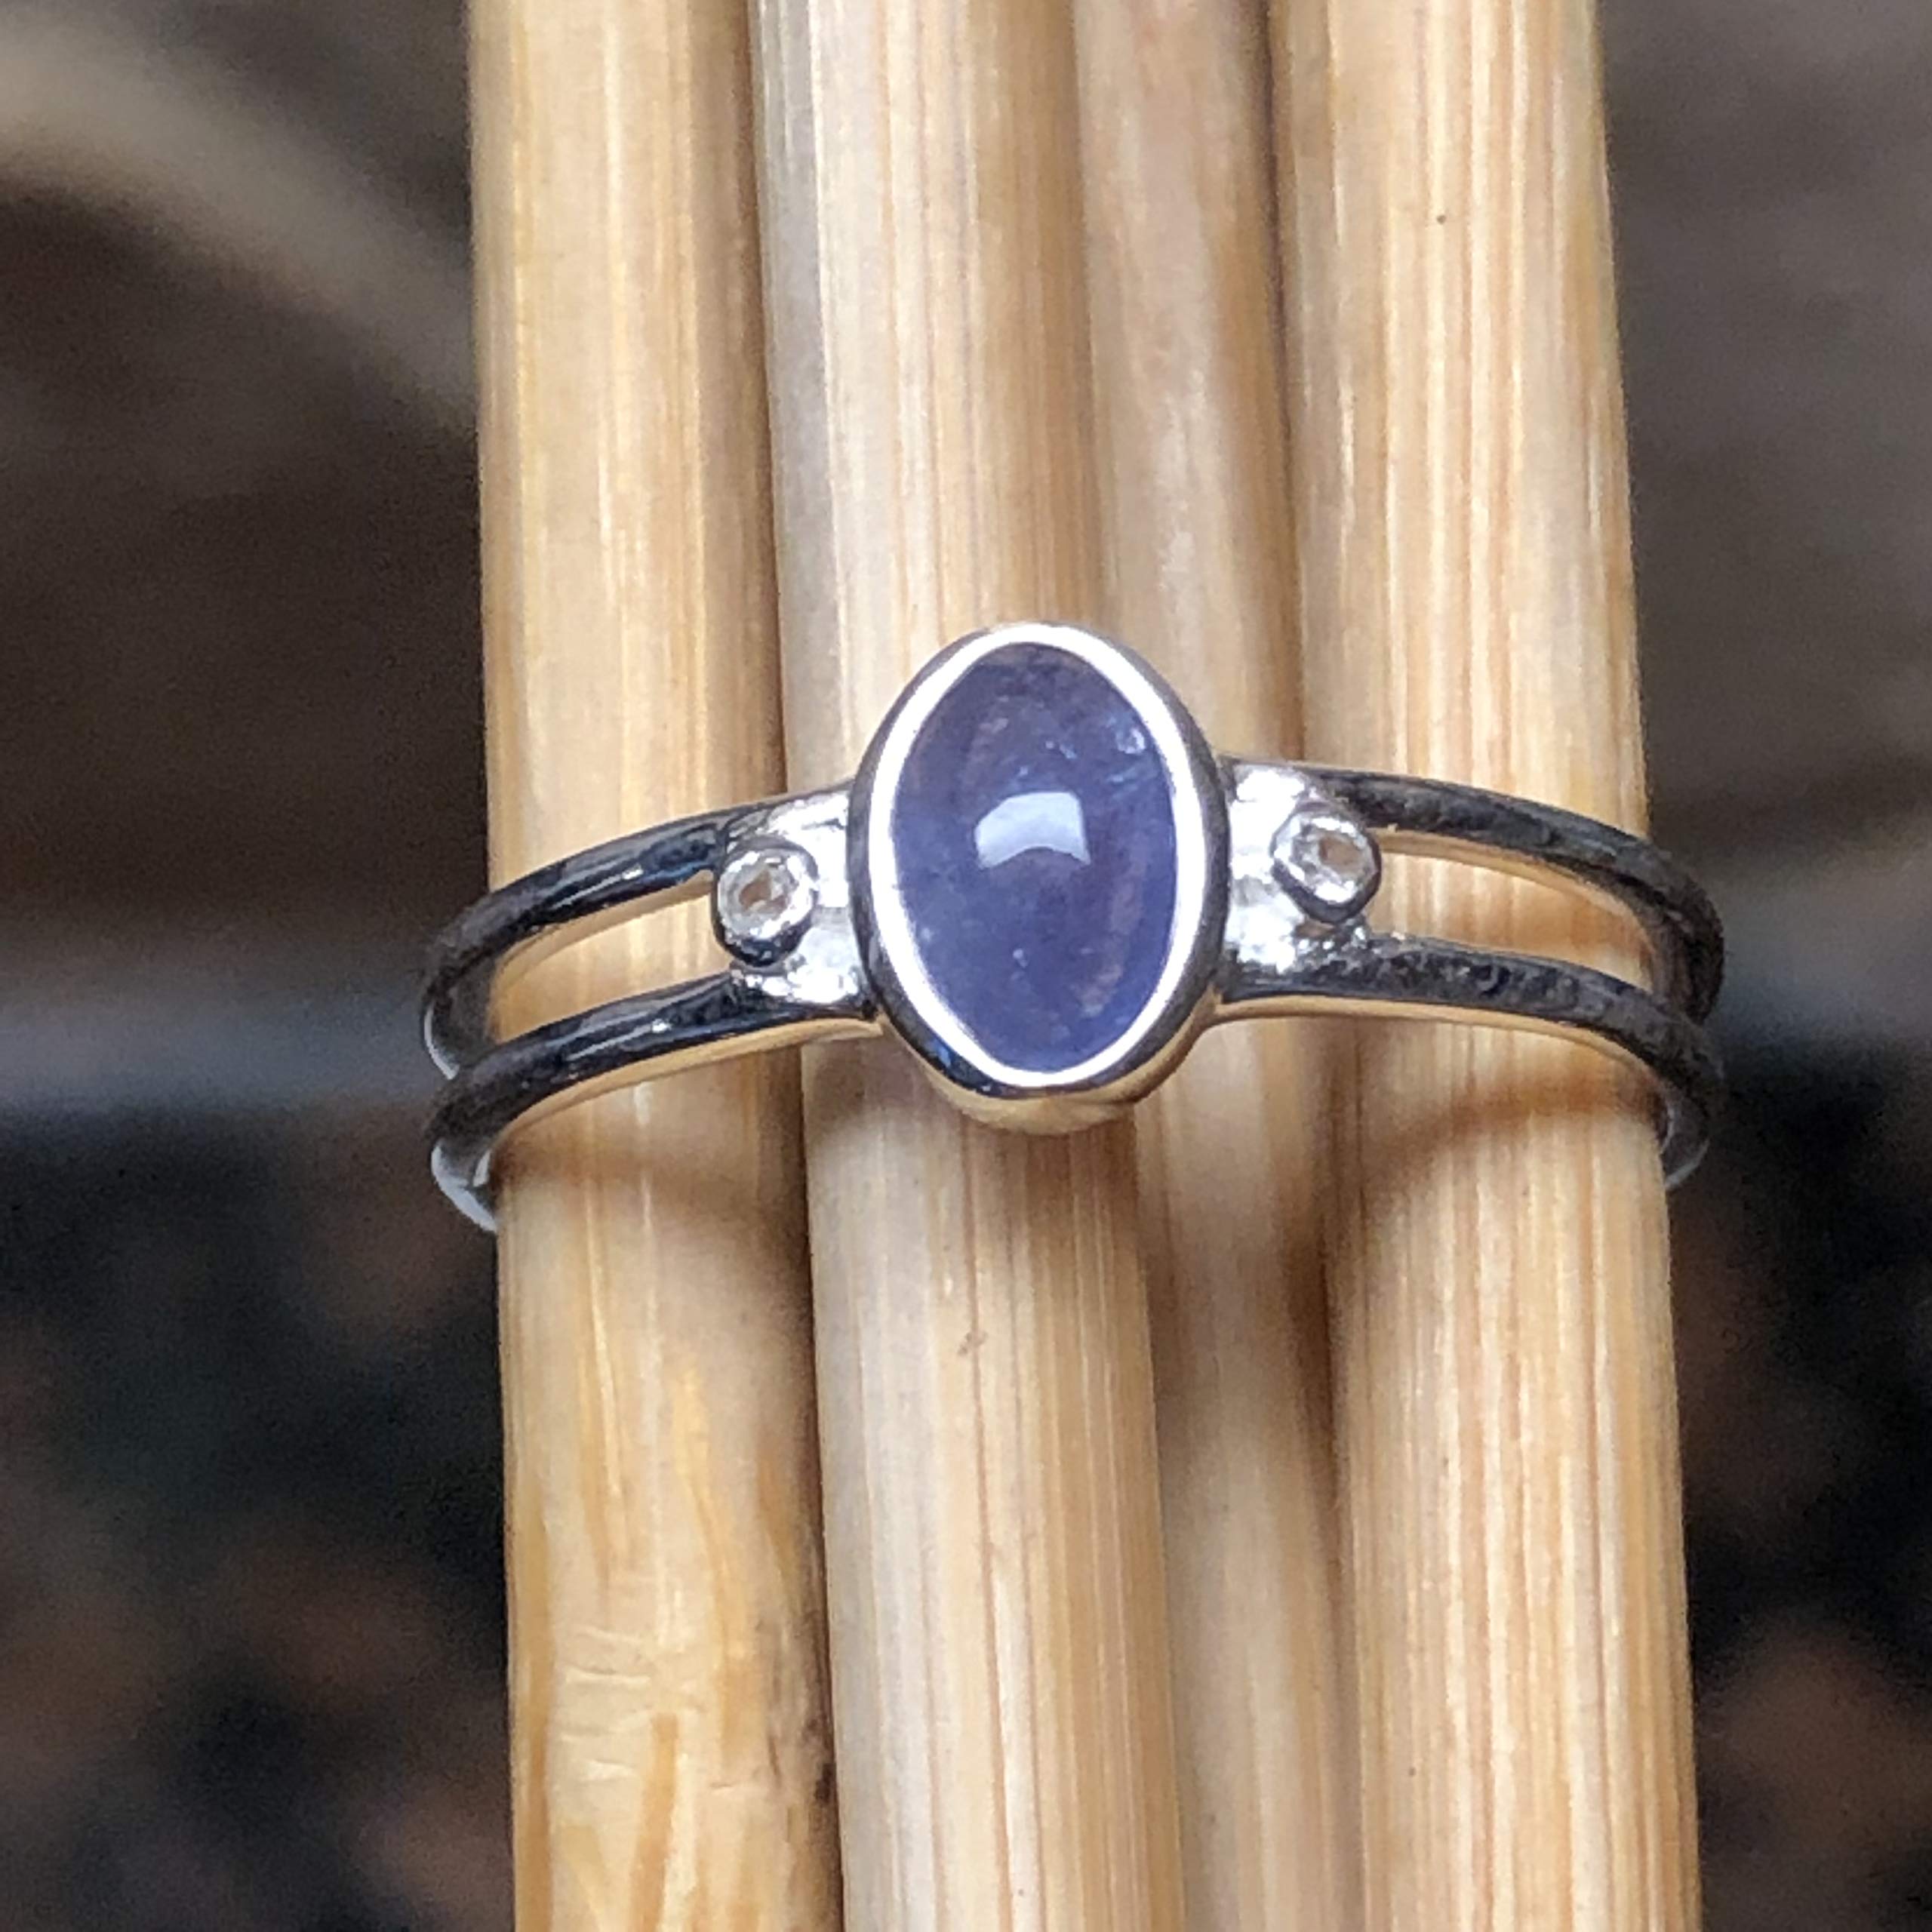 Genuine Blue Tanzanite 925 Solid Sterling Silver Engagement Ring Size 6, 7, 8, 9 - Natural Rocks by Kala